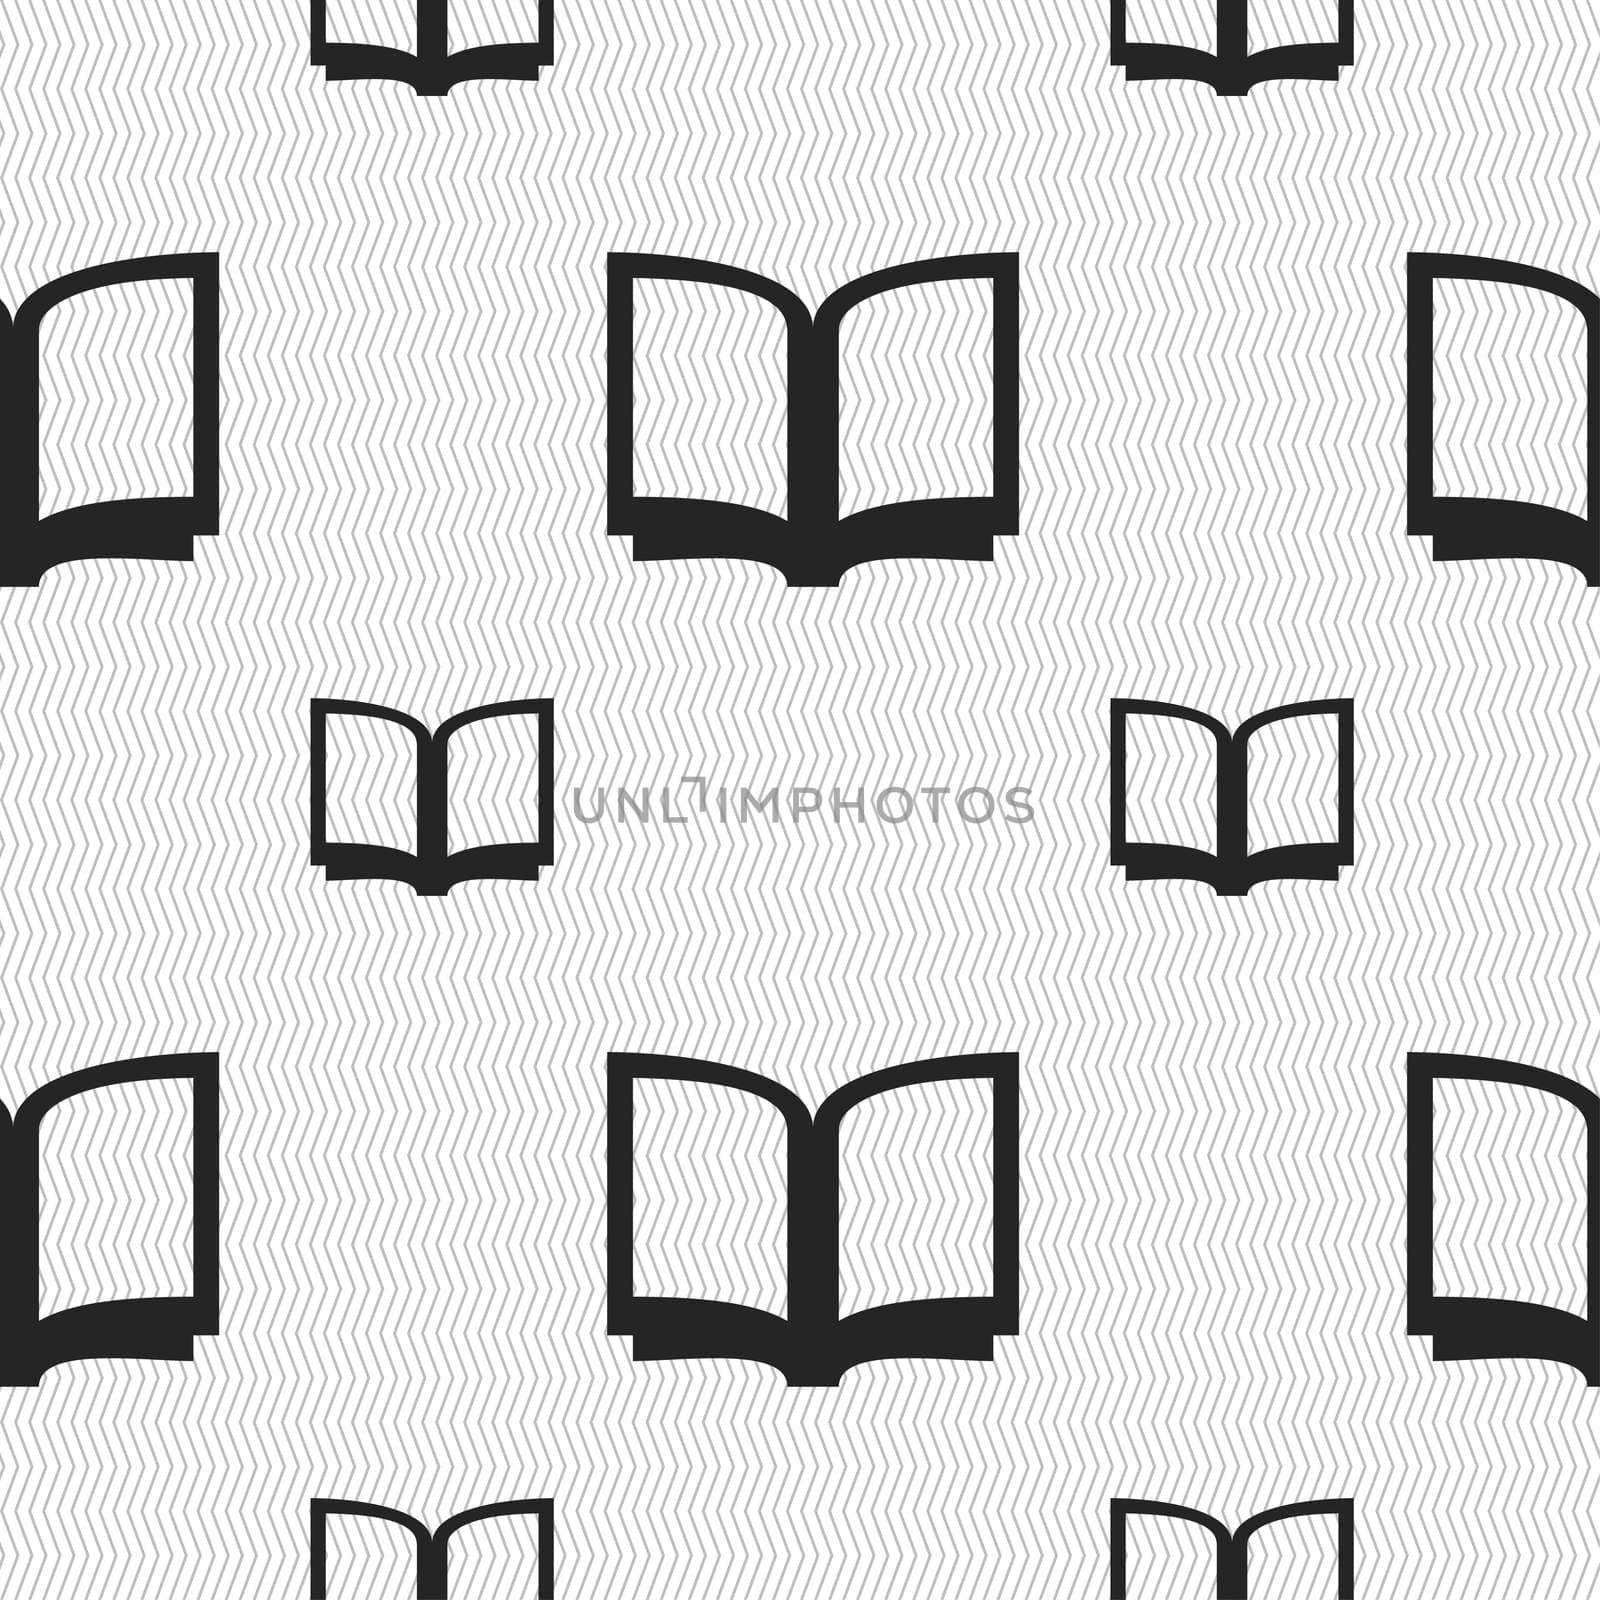 Open book icon sign. Seamless pattern with geometric texture. illustration